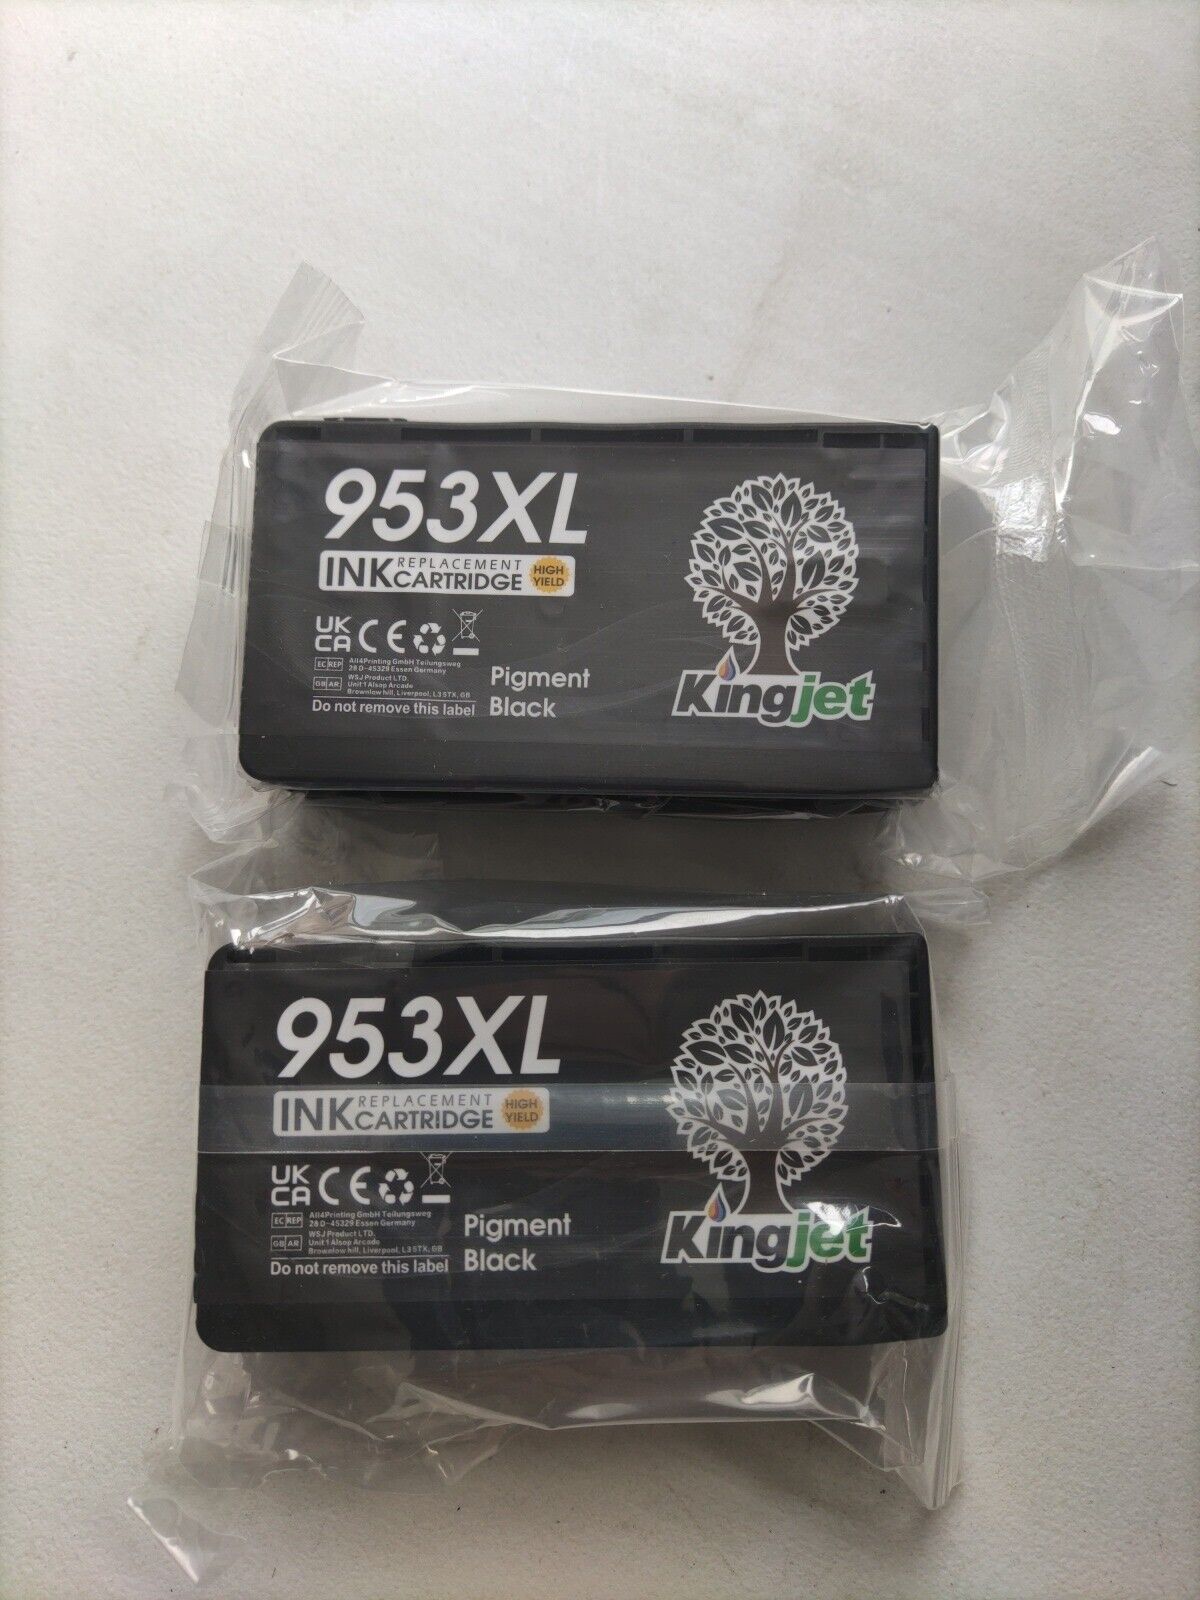 Compatible HP 953XL High Capacity Black Ink CartridgeS X2. Ref T3